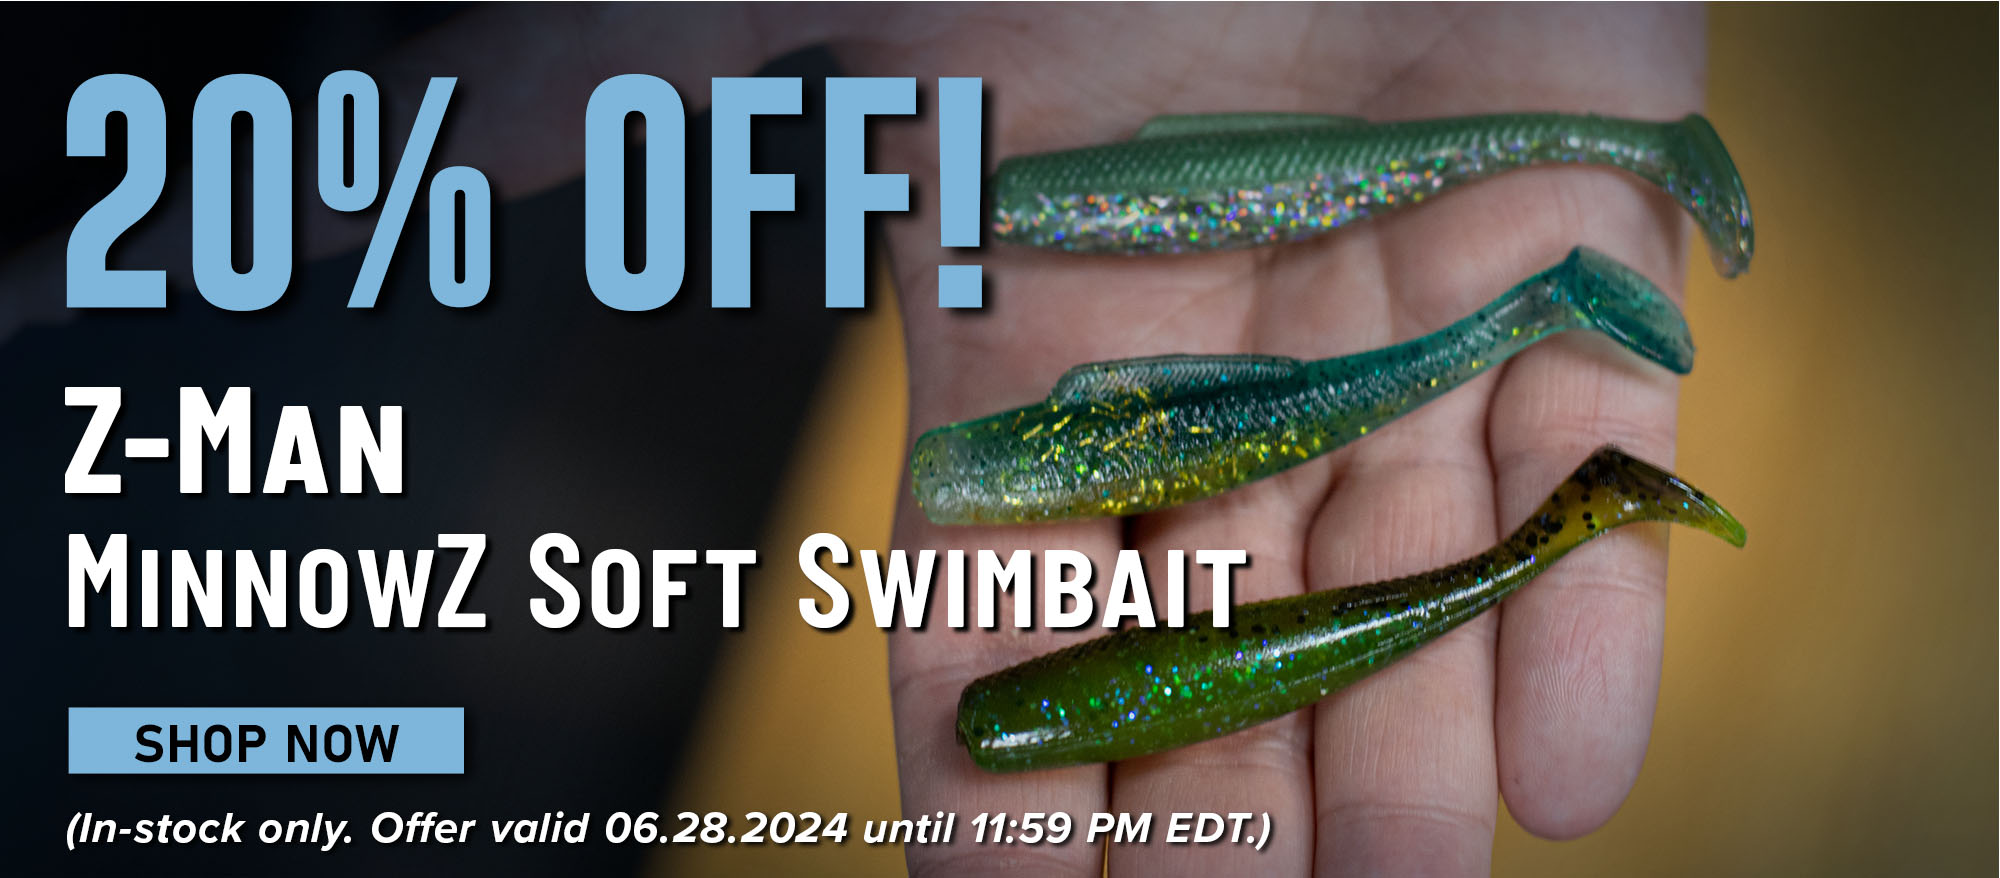 20% Off! Z-Man MinnowZ Soft Swimbait Shop Now (In-stock only. Offer valid 06.28.2024 until 11:59 PM EDT.)